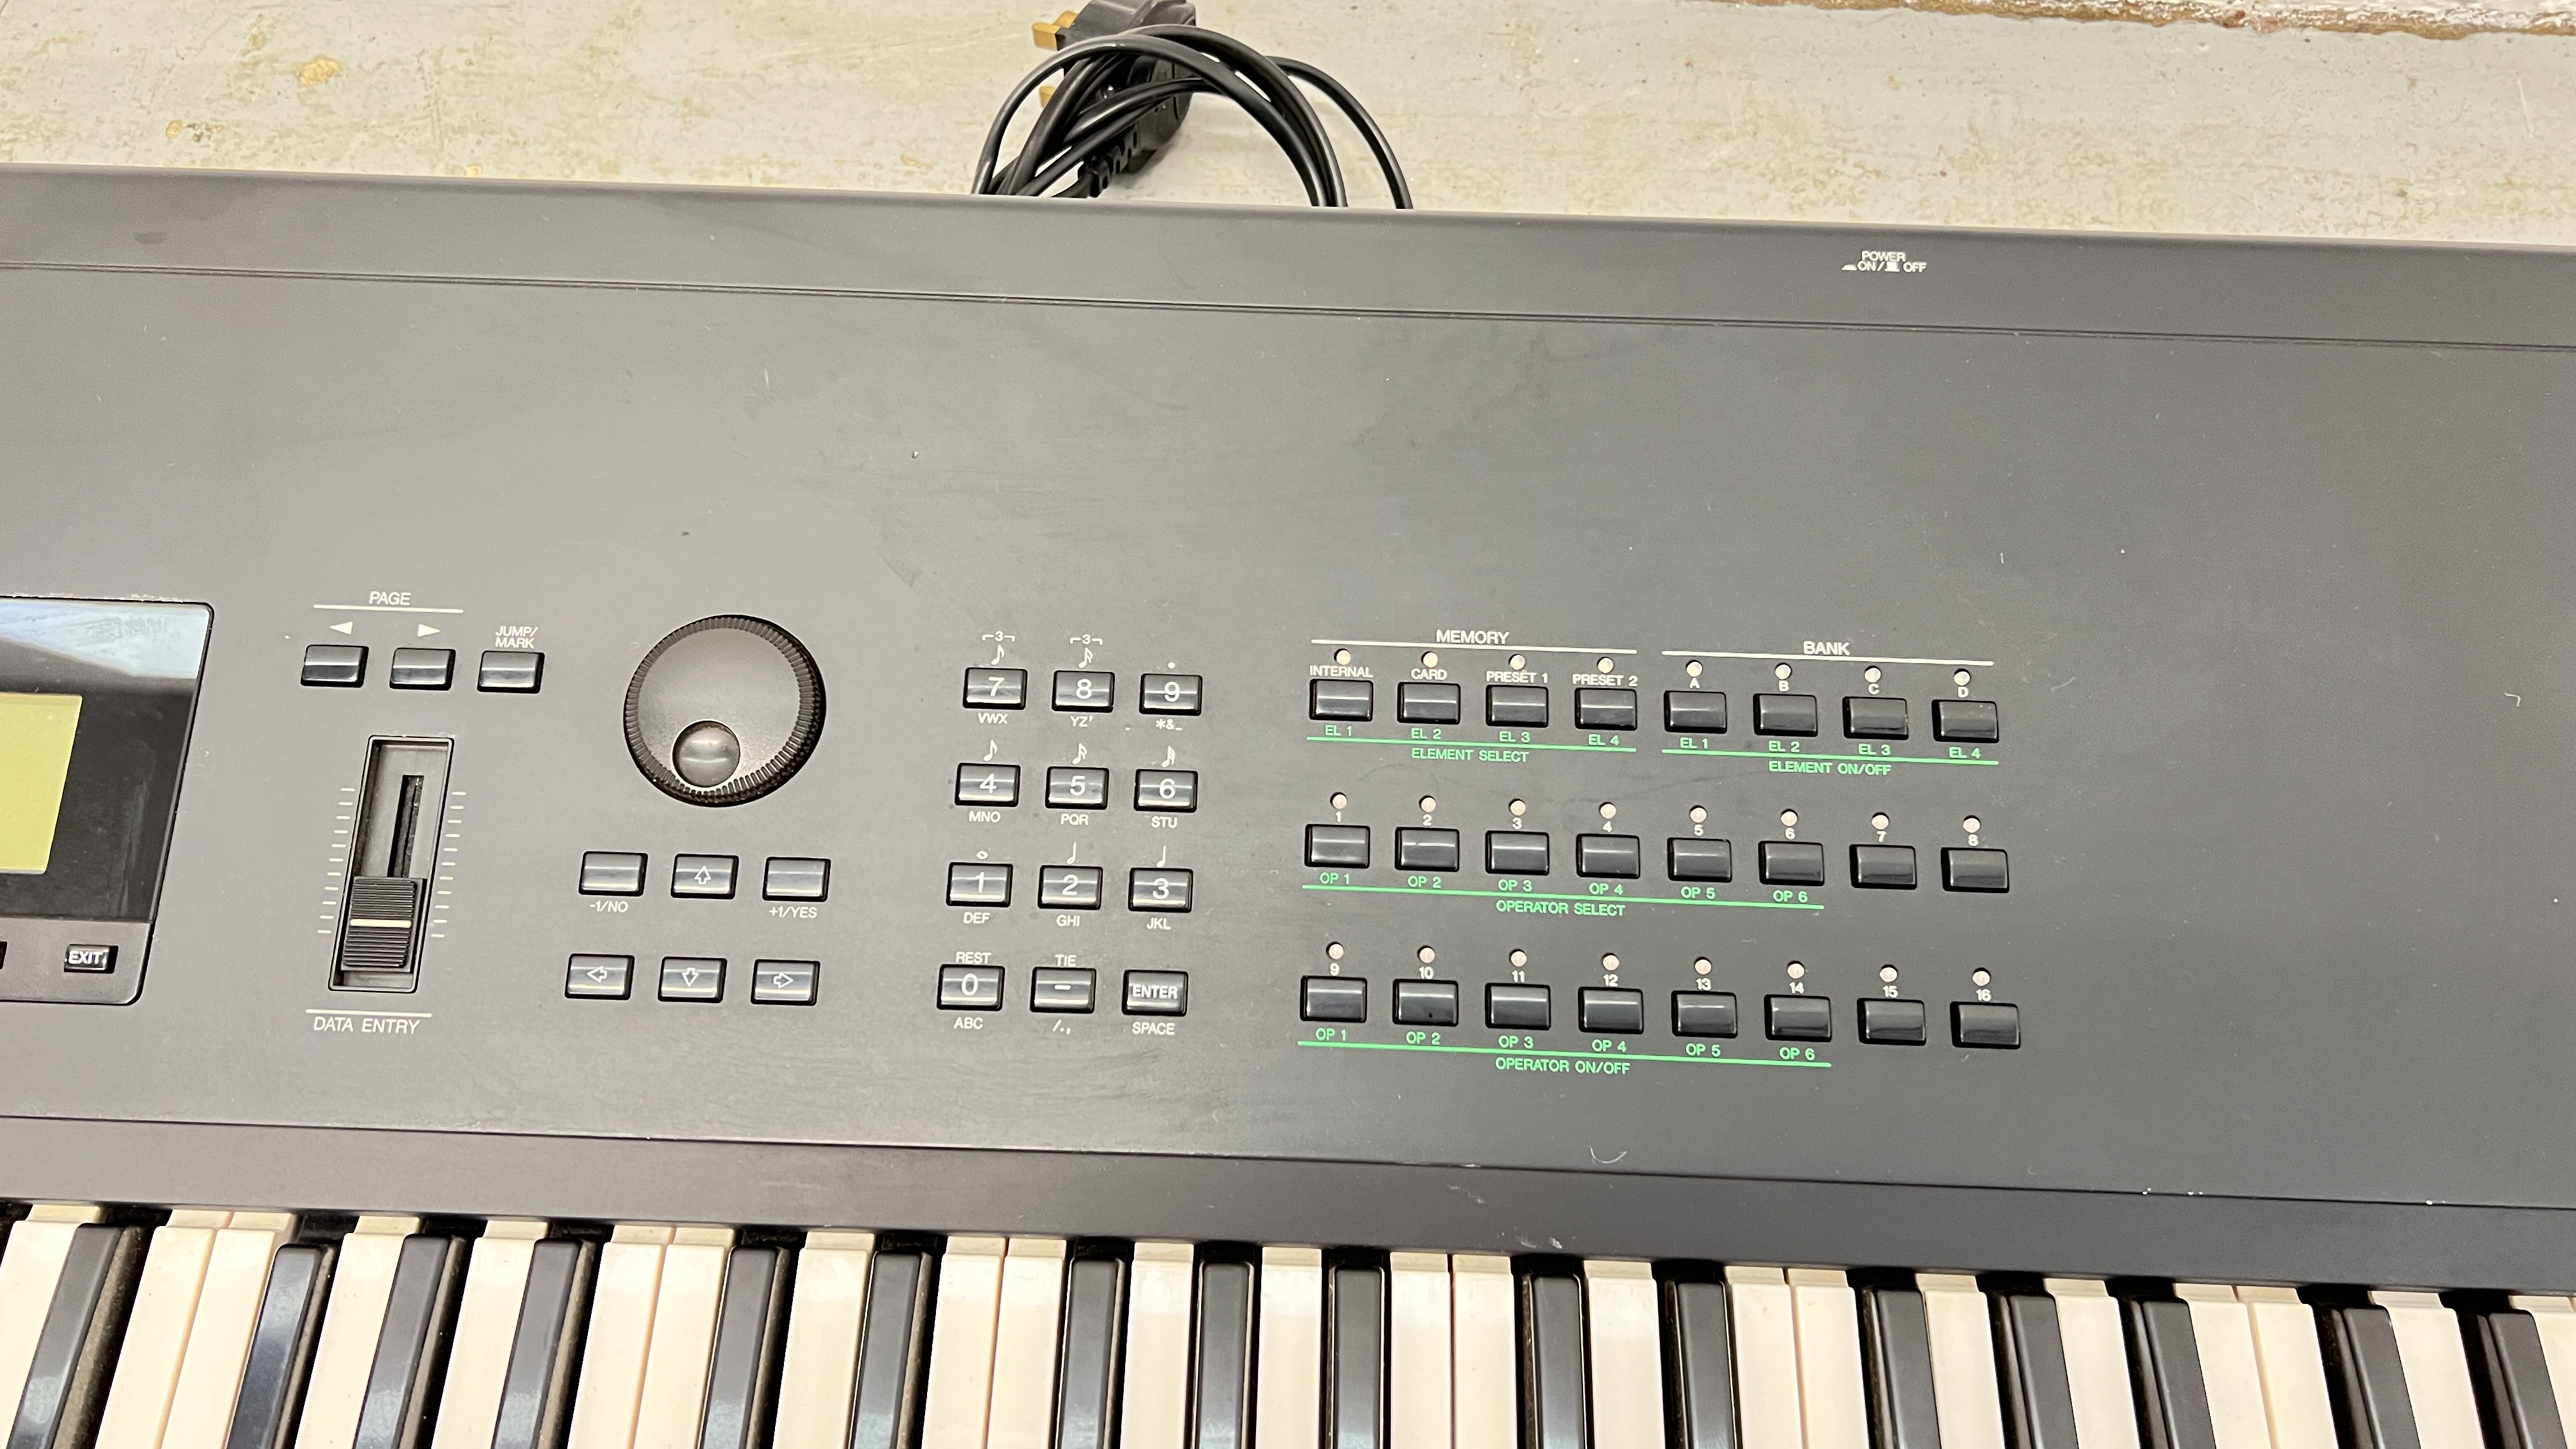 YAMAHA SY99 MUSIC SYNTHESIZER - SOLD AS SEEN - AS CLEARED. - Image 4 of 6